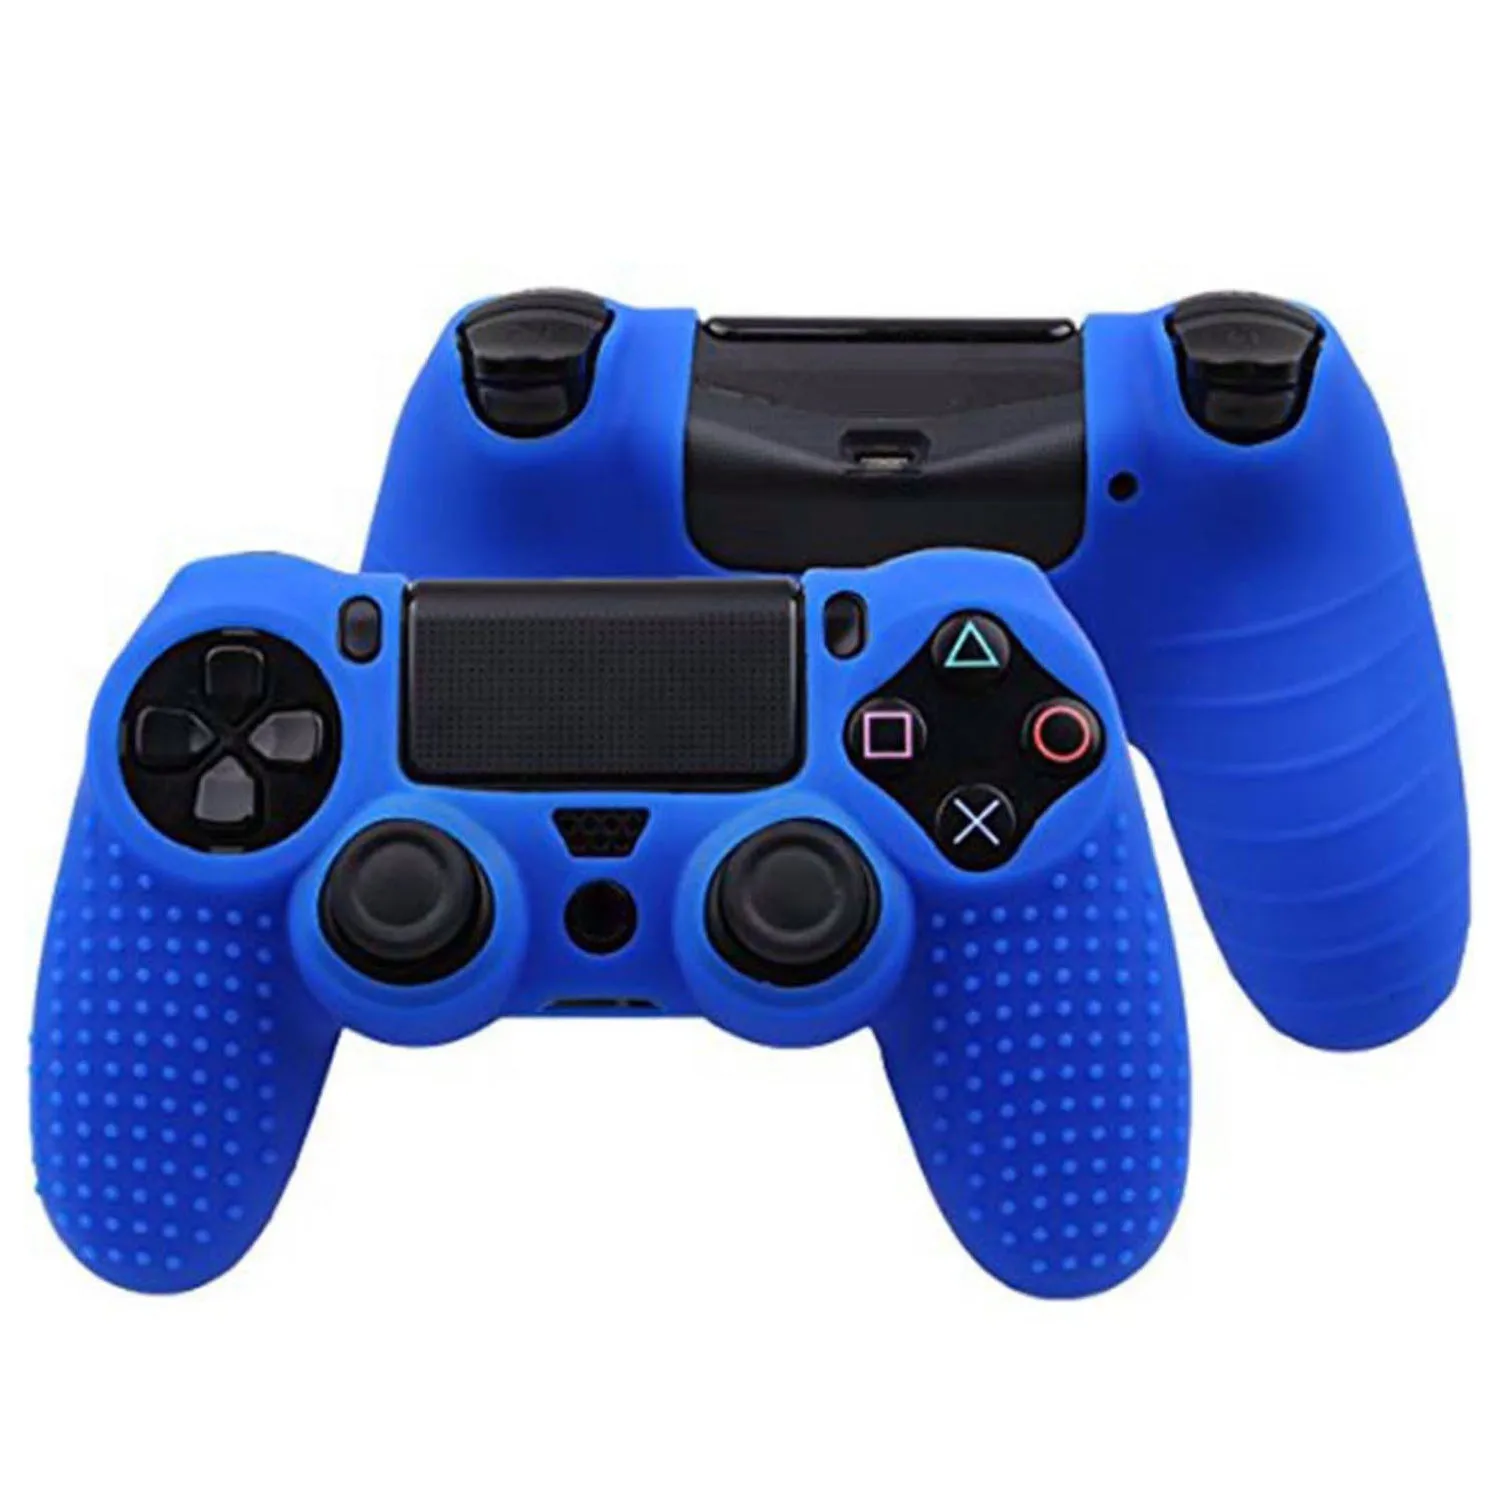 

Anti-slip Silicone Skin Cover Case for ps 4 PlayStation Dualshock 4 Gamepad Case for PS4 PS4 Pro Slim Controller, Colors